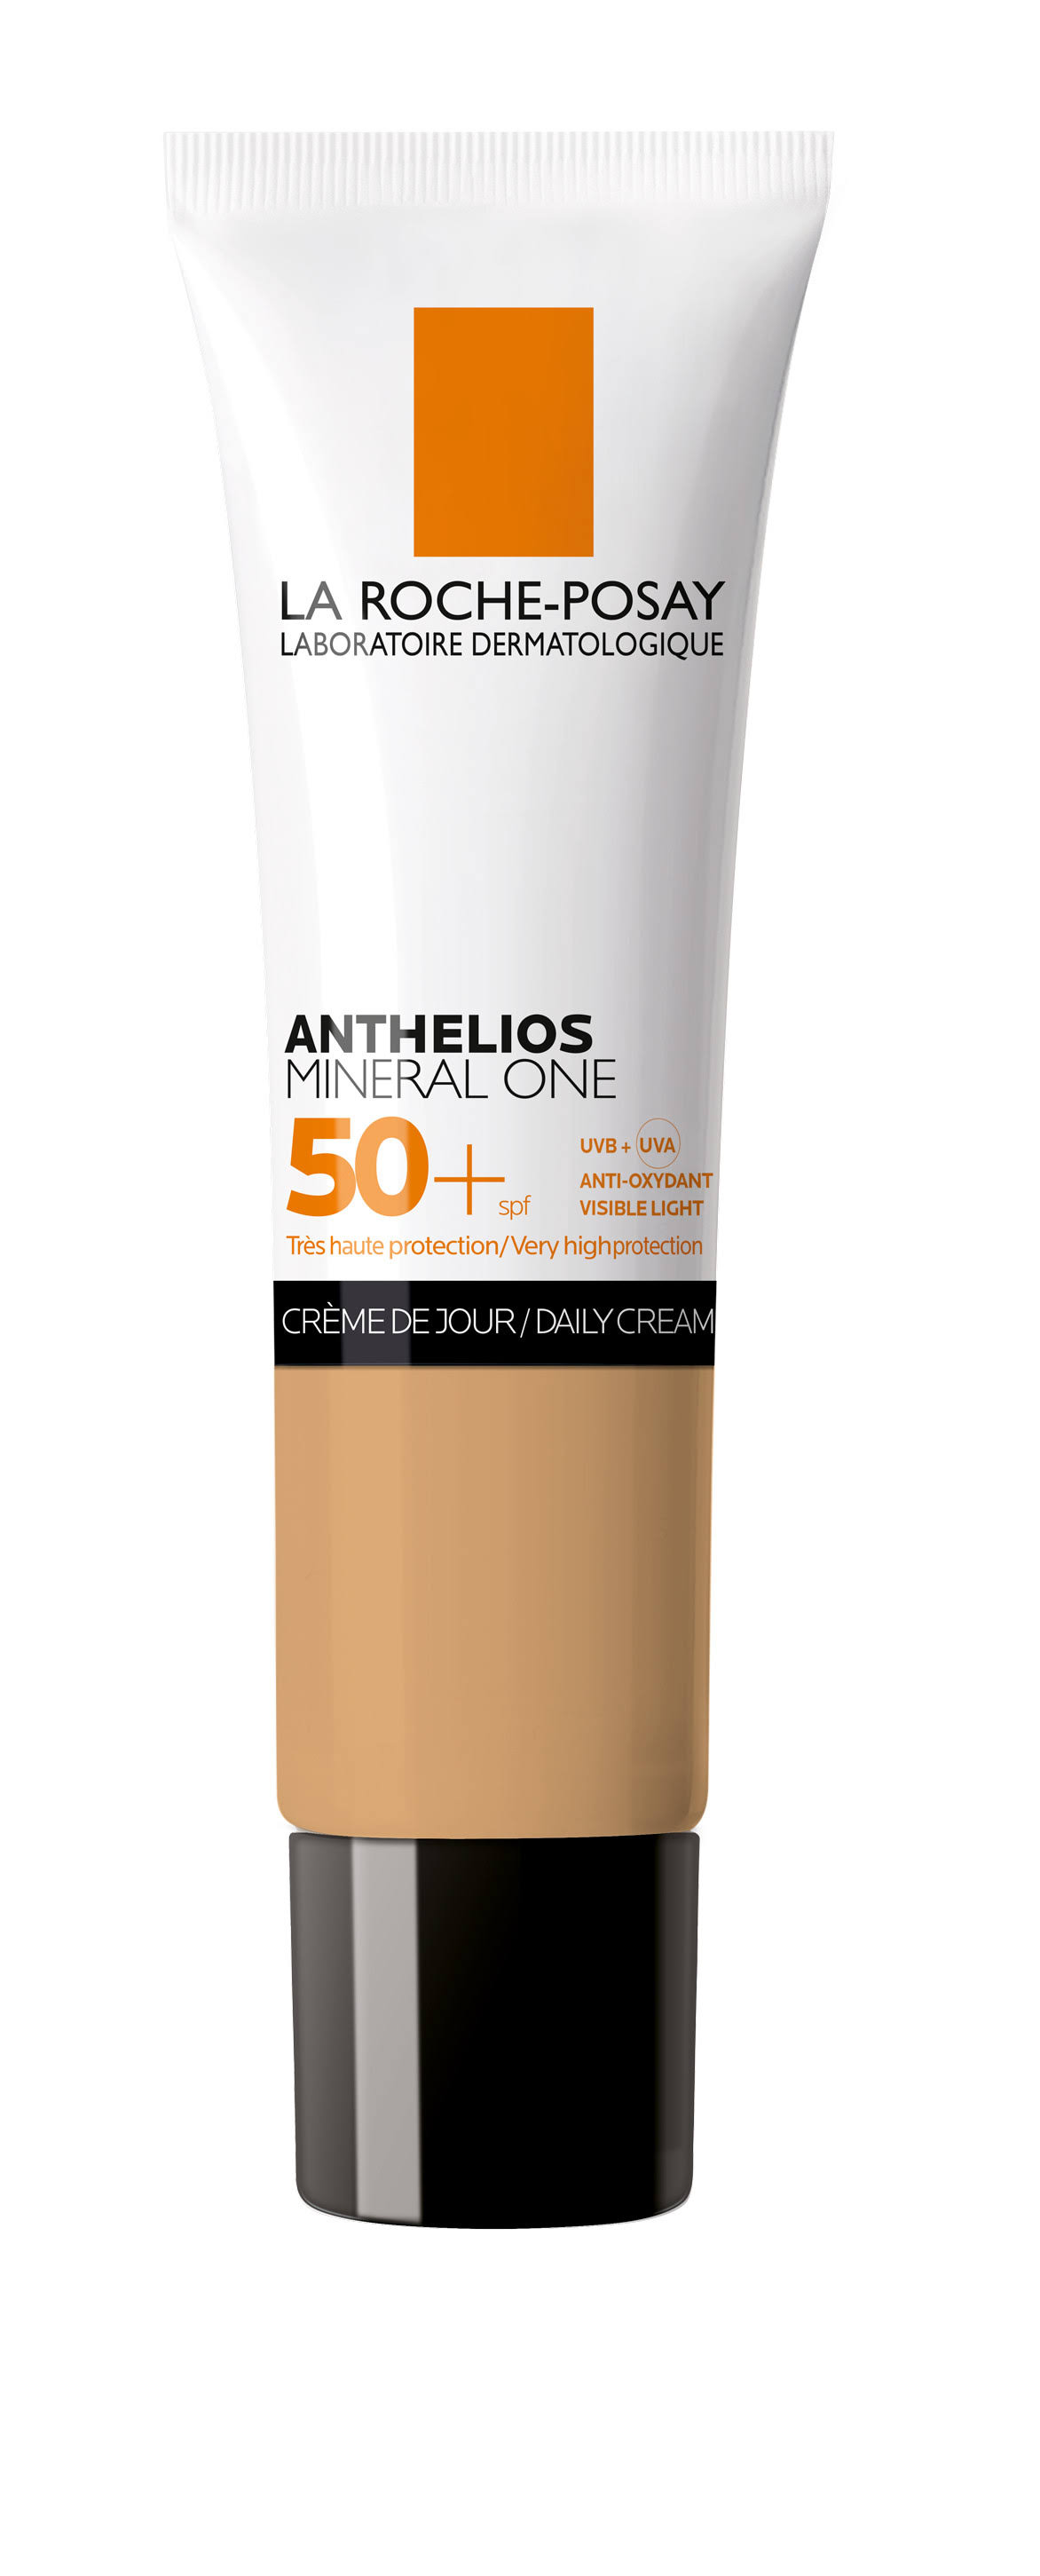 La Roche-Posay Anthelios Mineral One 04 Brown 30ml